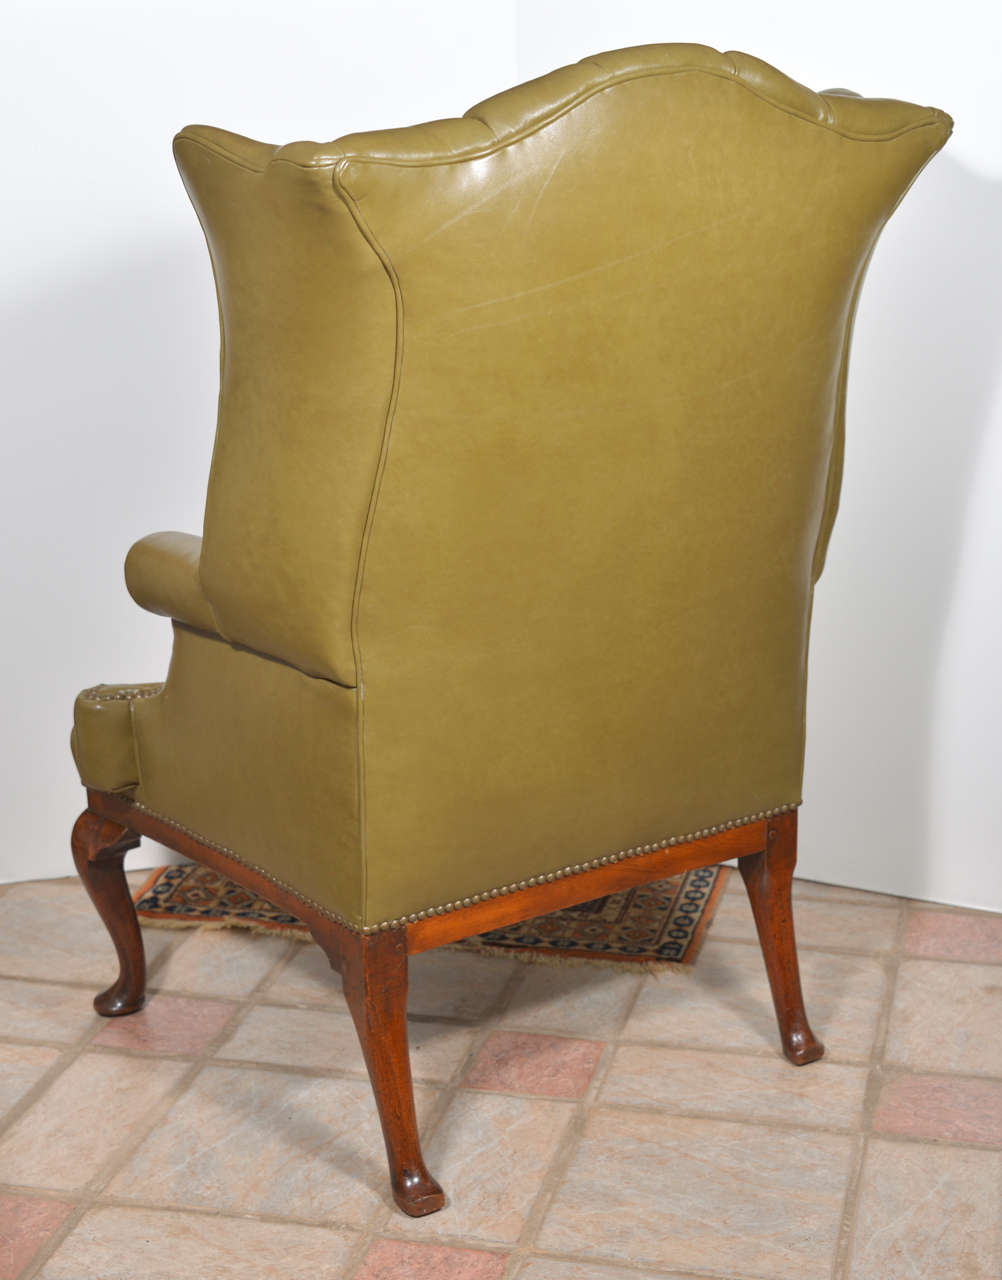 19th Century 18th Century English Tufted Leather Queen Anne Wing Chair